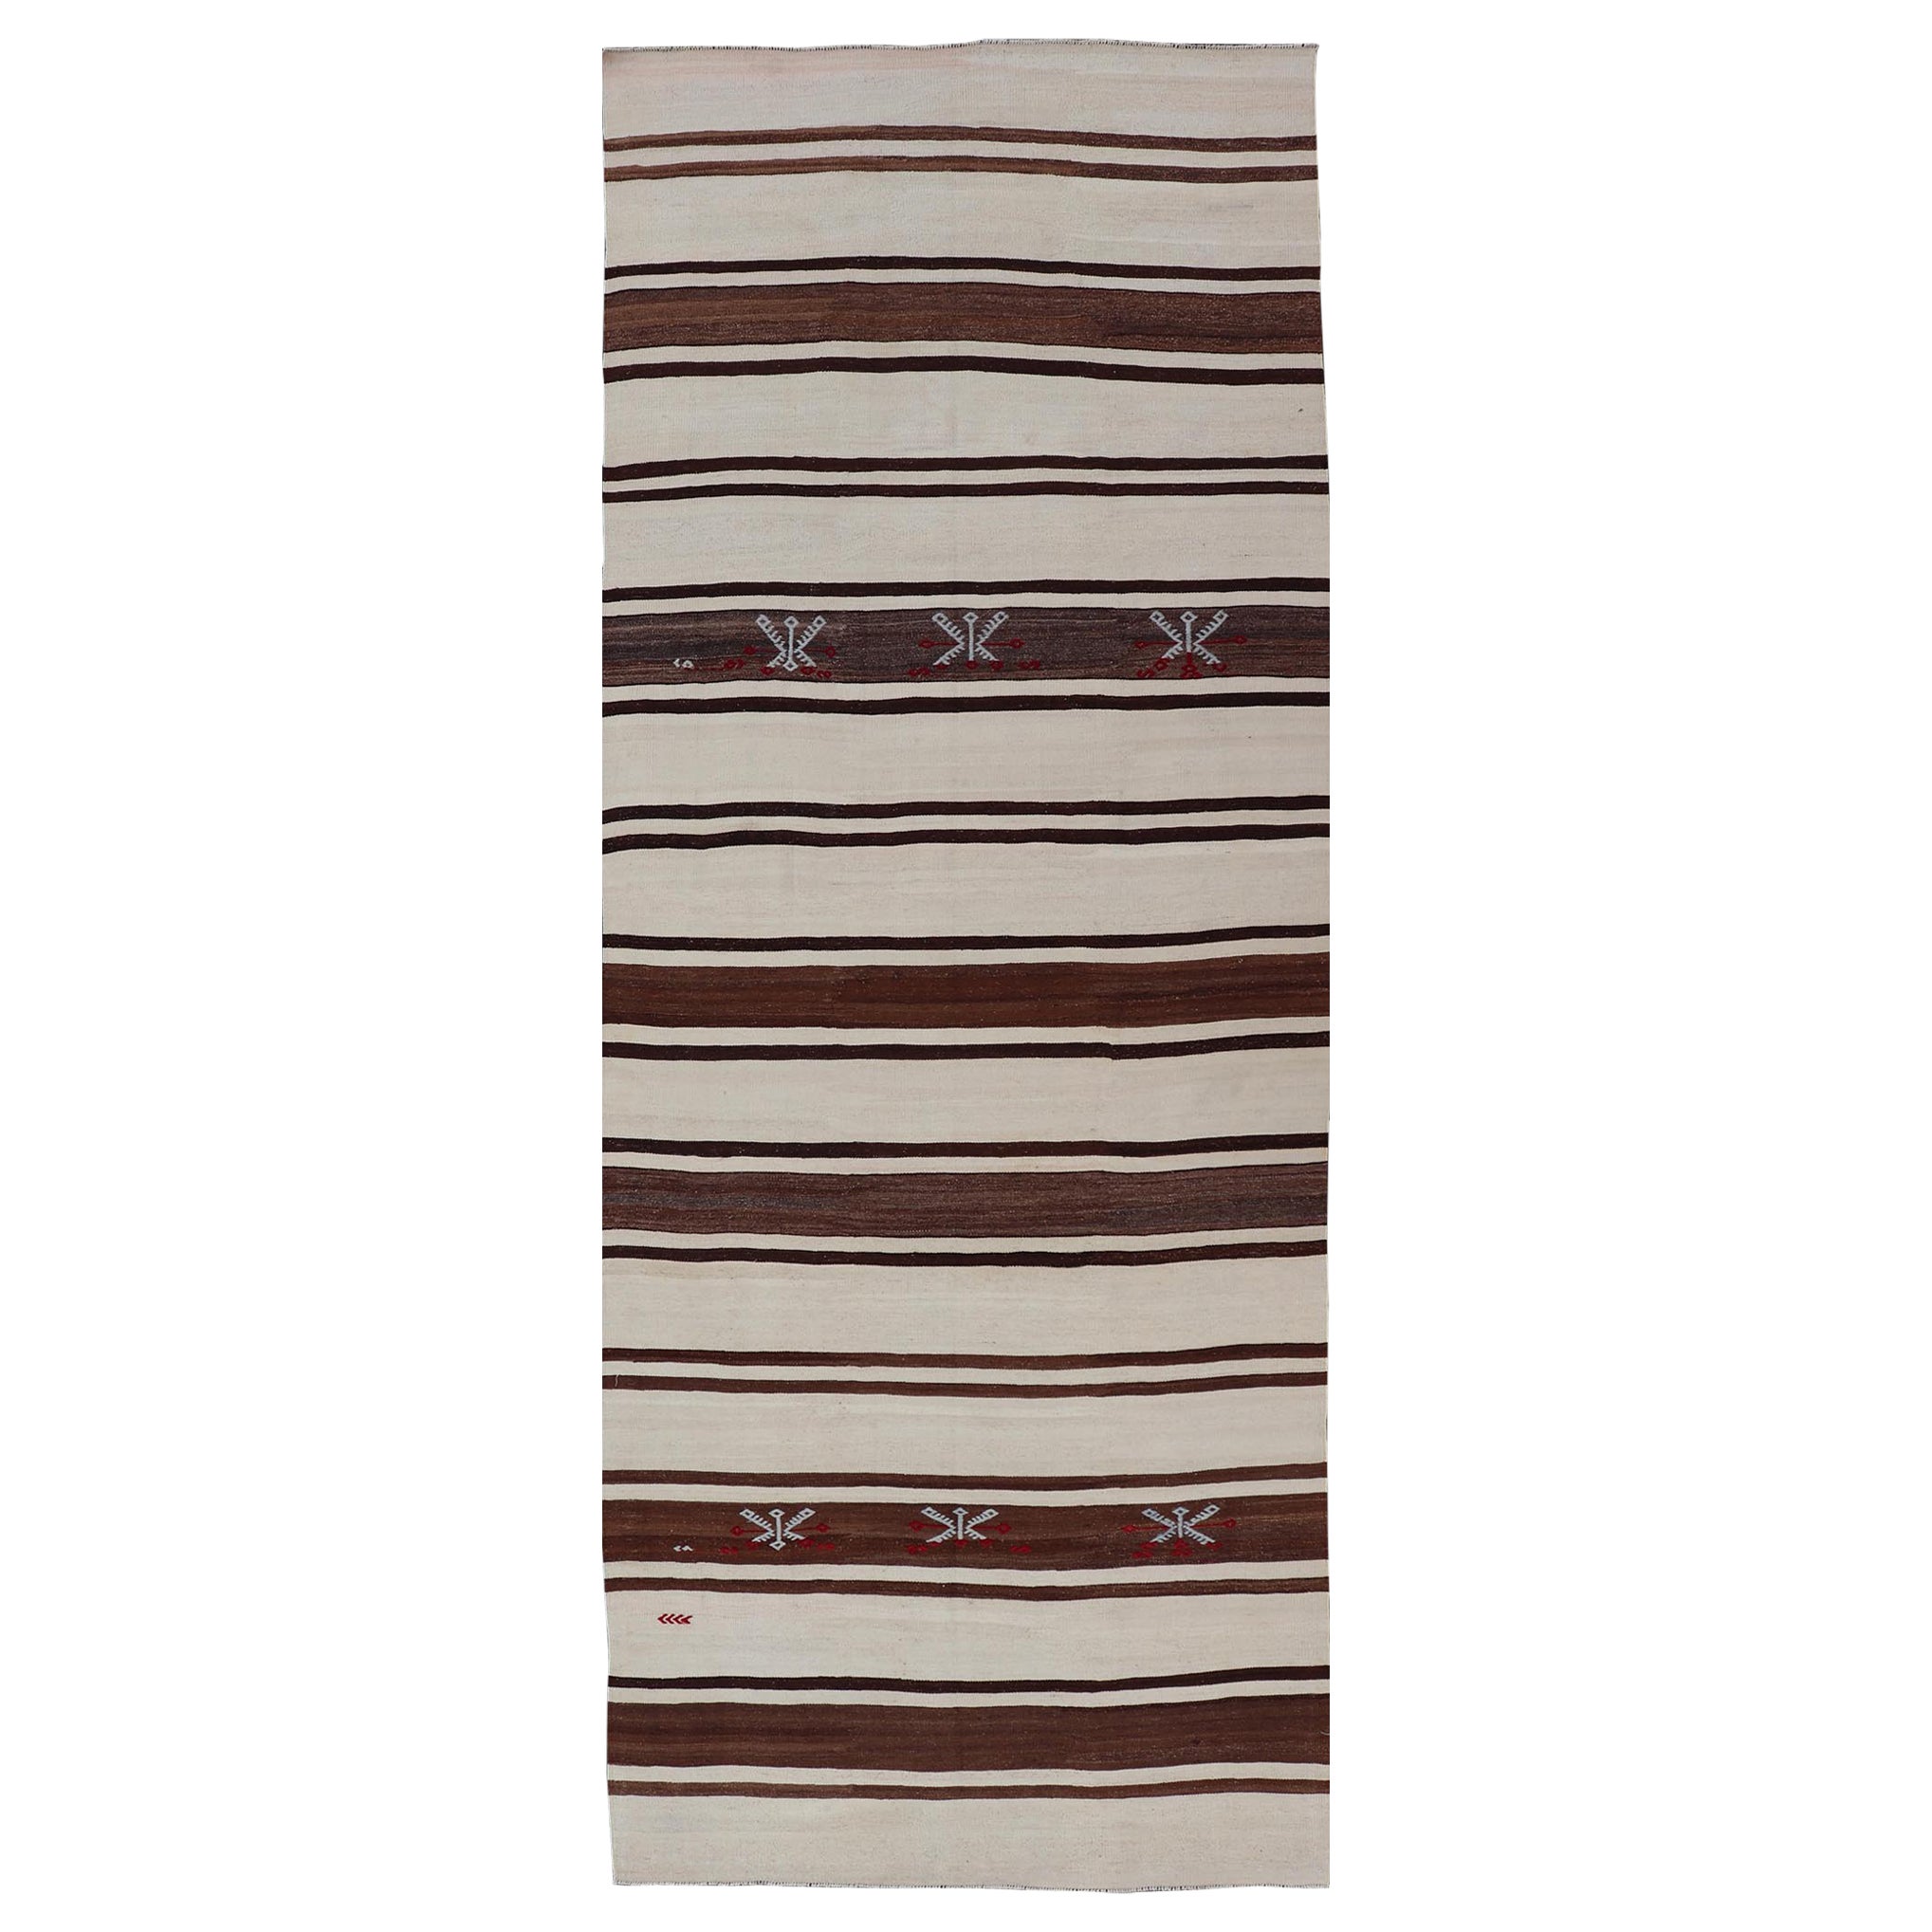 Turkish Vintage Flat-Weave in Shades of Brown and Ivory with Stripe Design For Sale